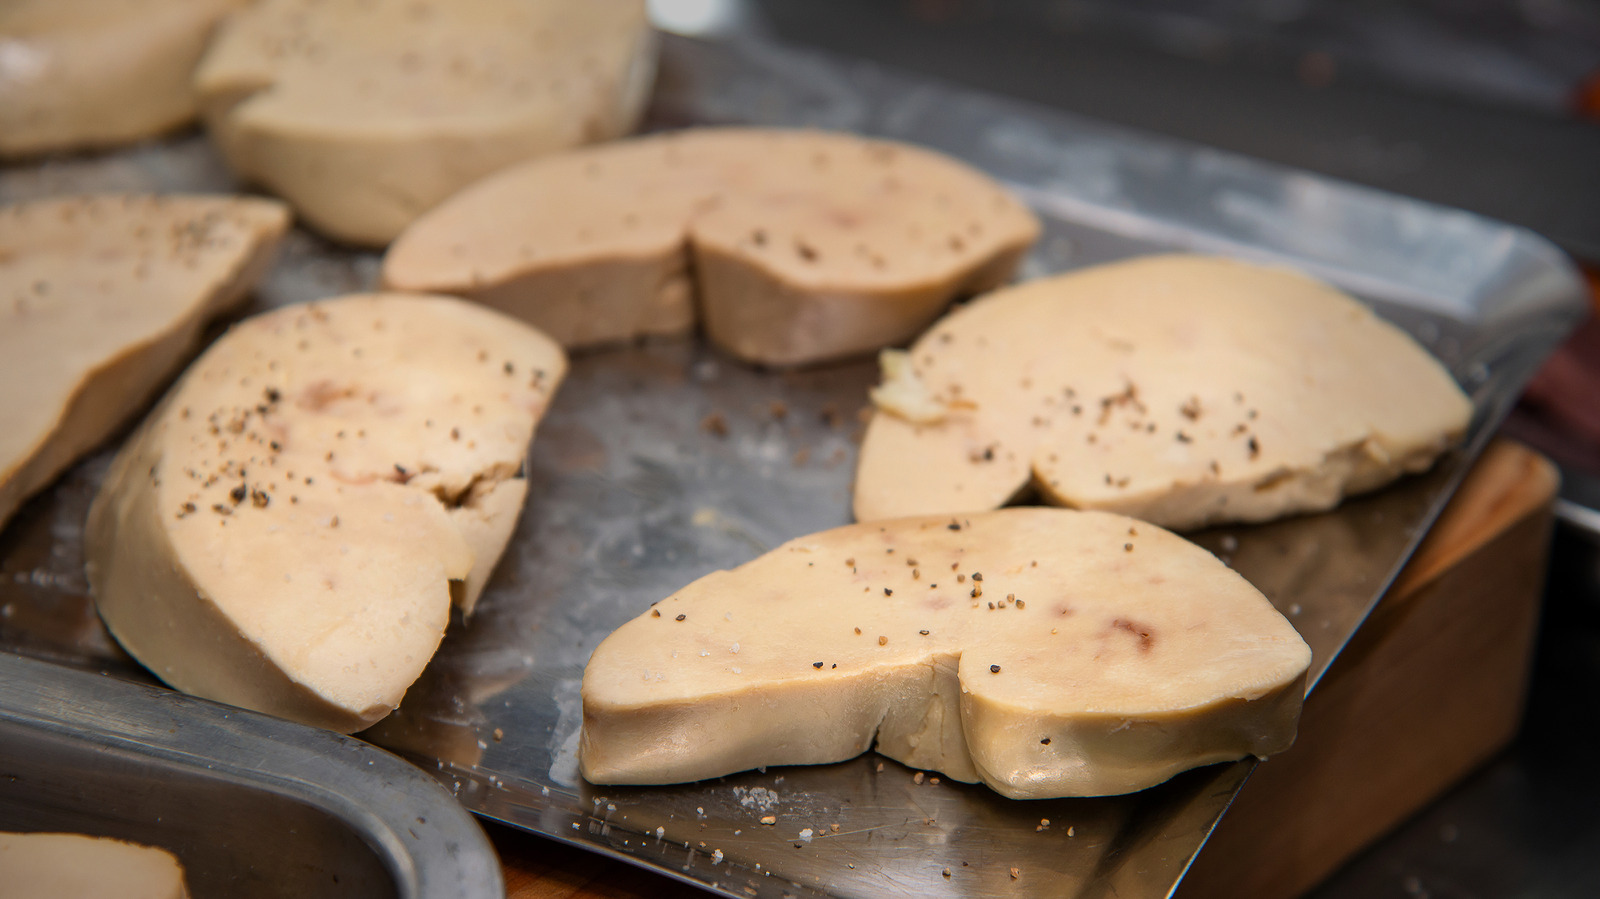 Why foie gras is illegal in so many countries